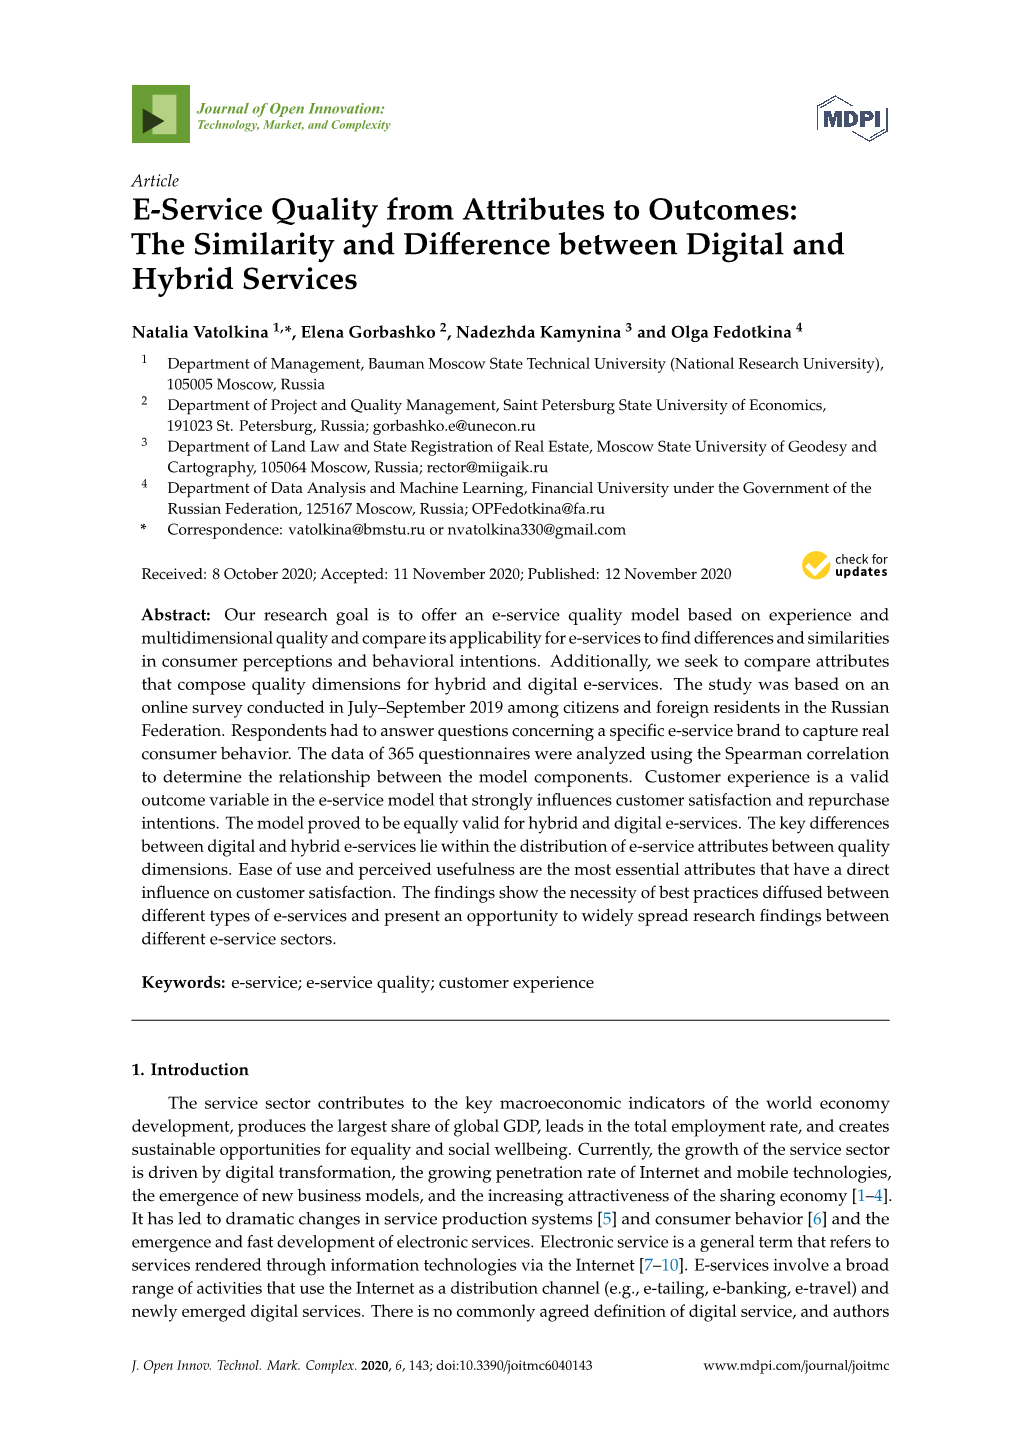 E-Service Quality from Attributes to Outcomes: the Similarity and Diﬀerence Between Digital and Hybrid Services